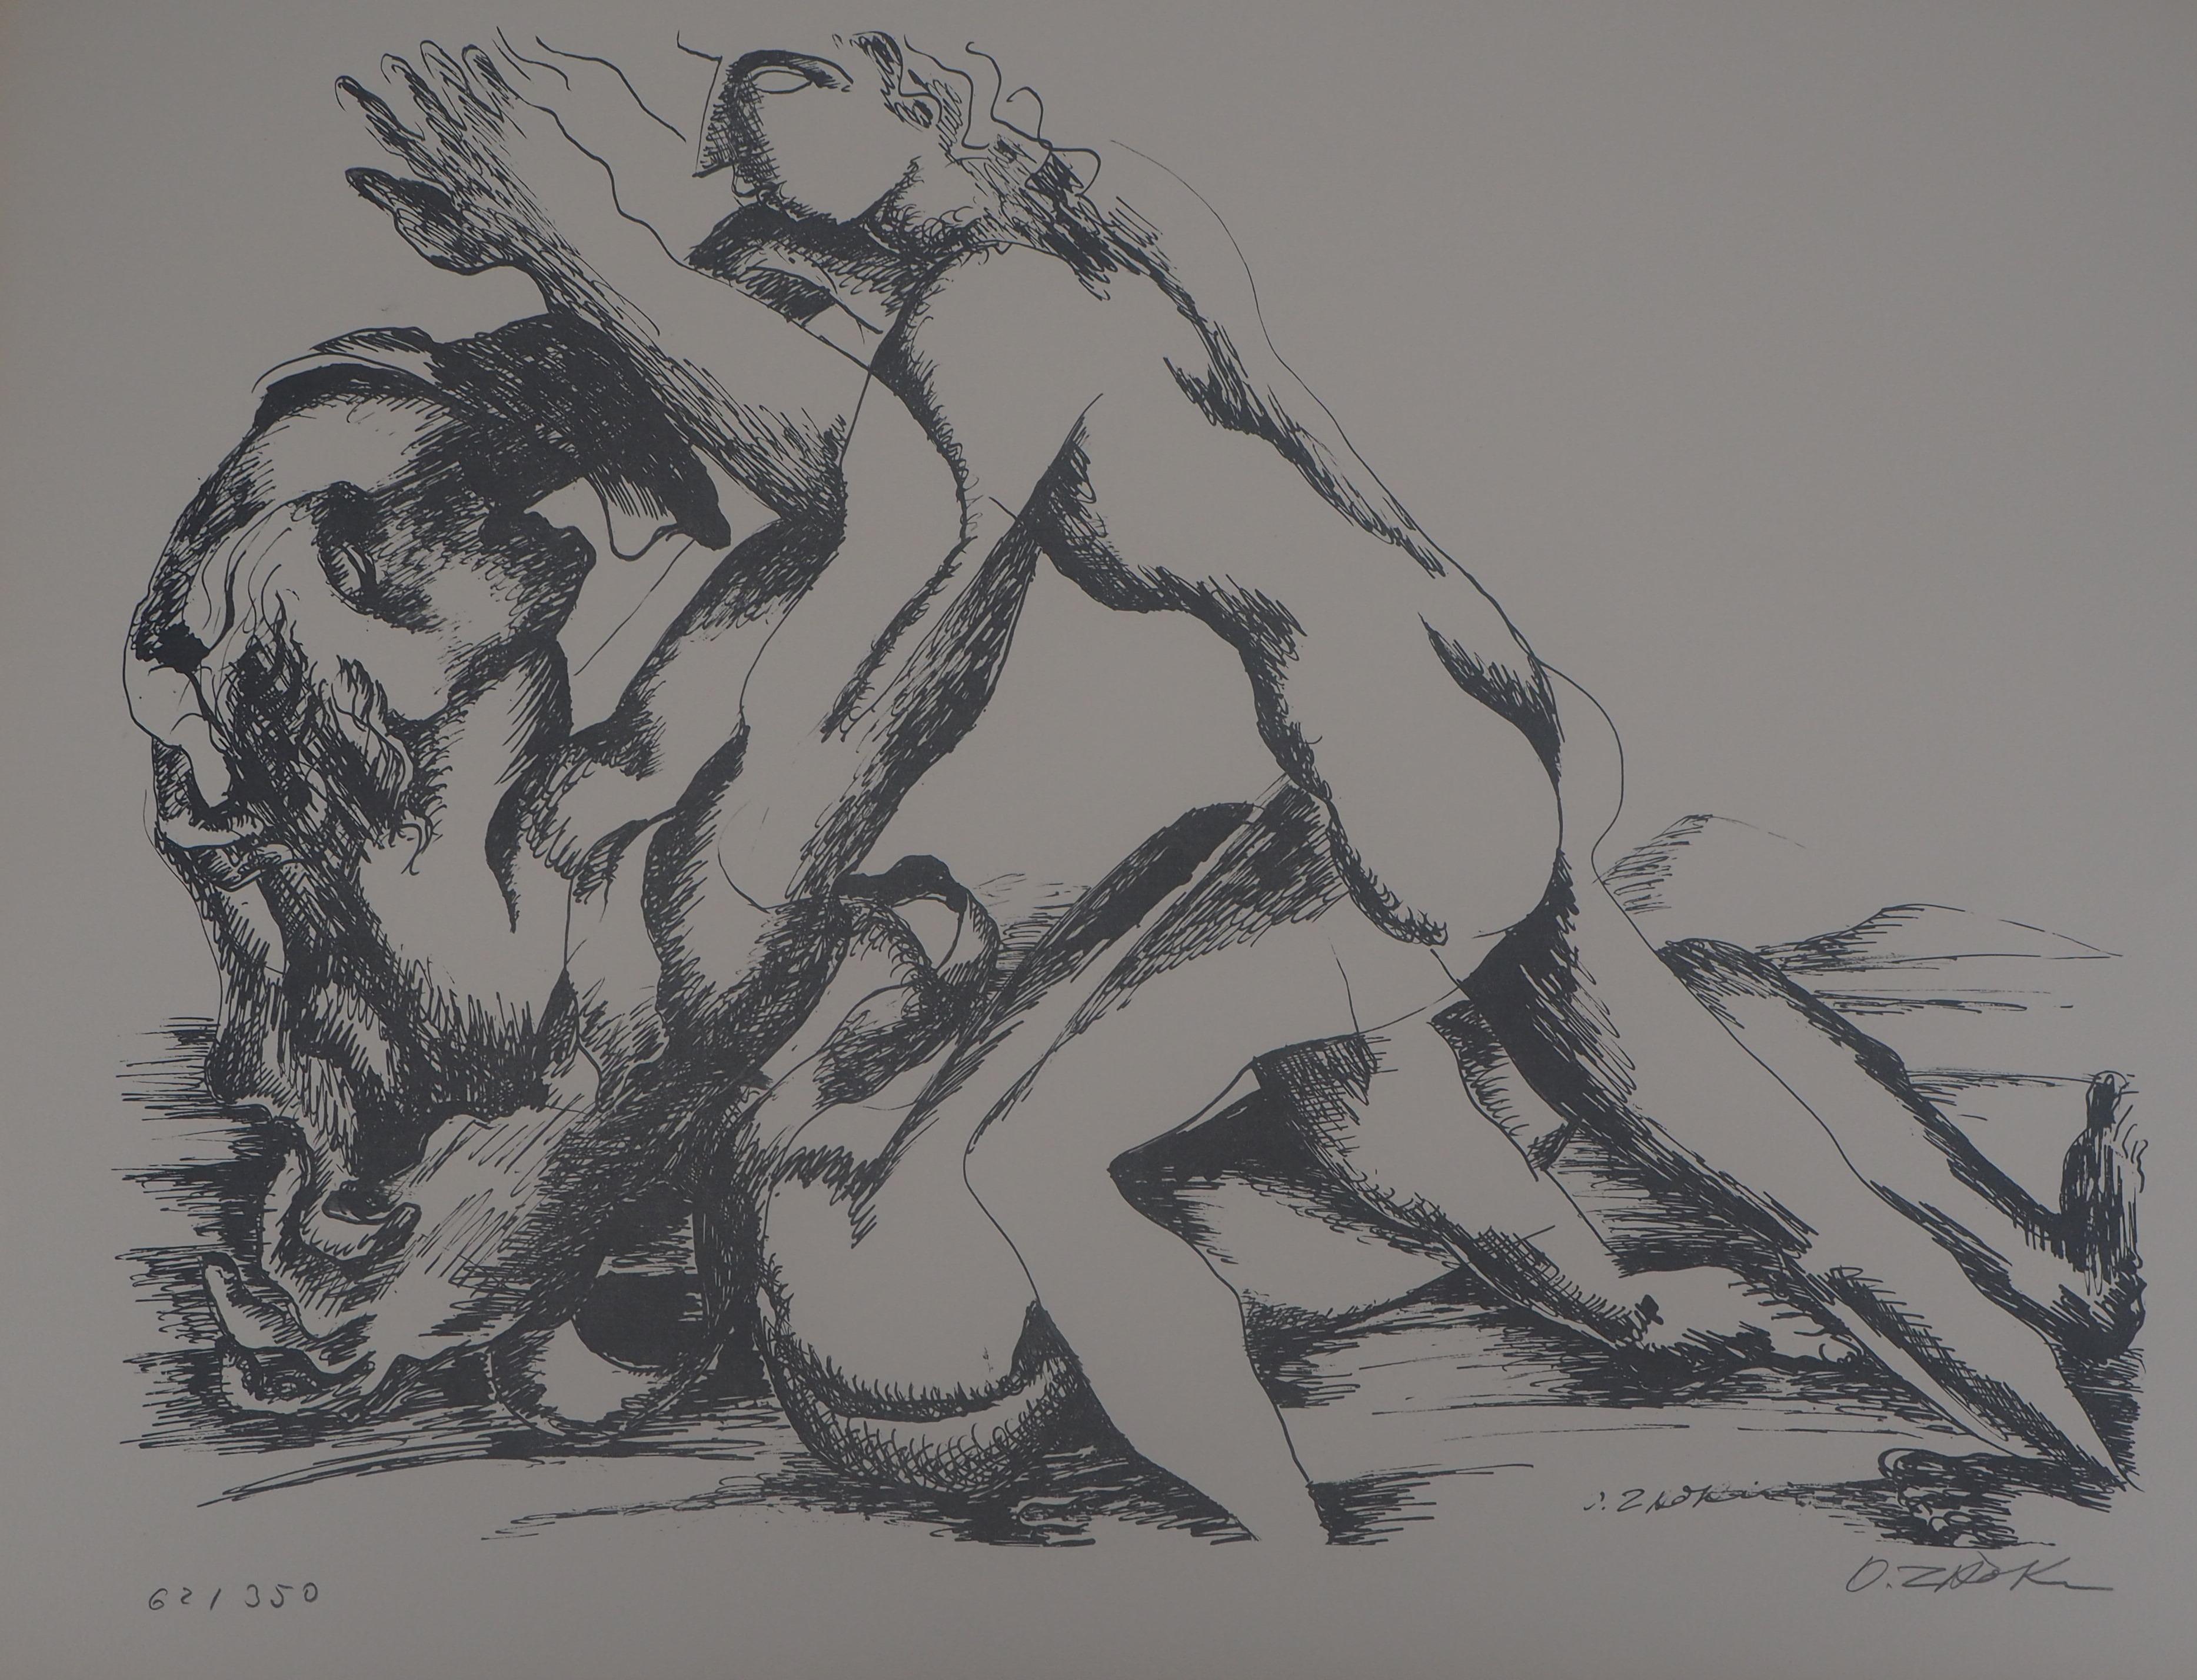 Ossip Zadkine Figurative Print - Mythology : Heracles and the Belt - Original Lithograph Hand Signed & Numbered